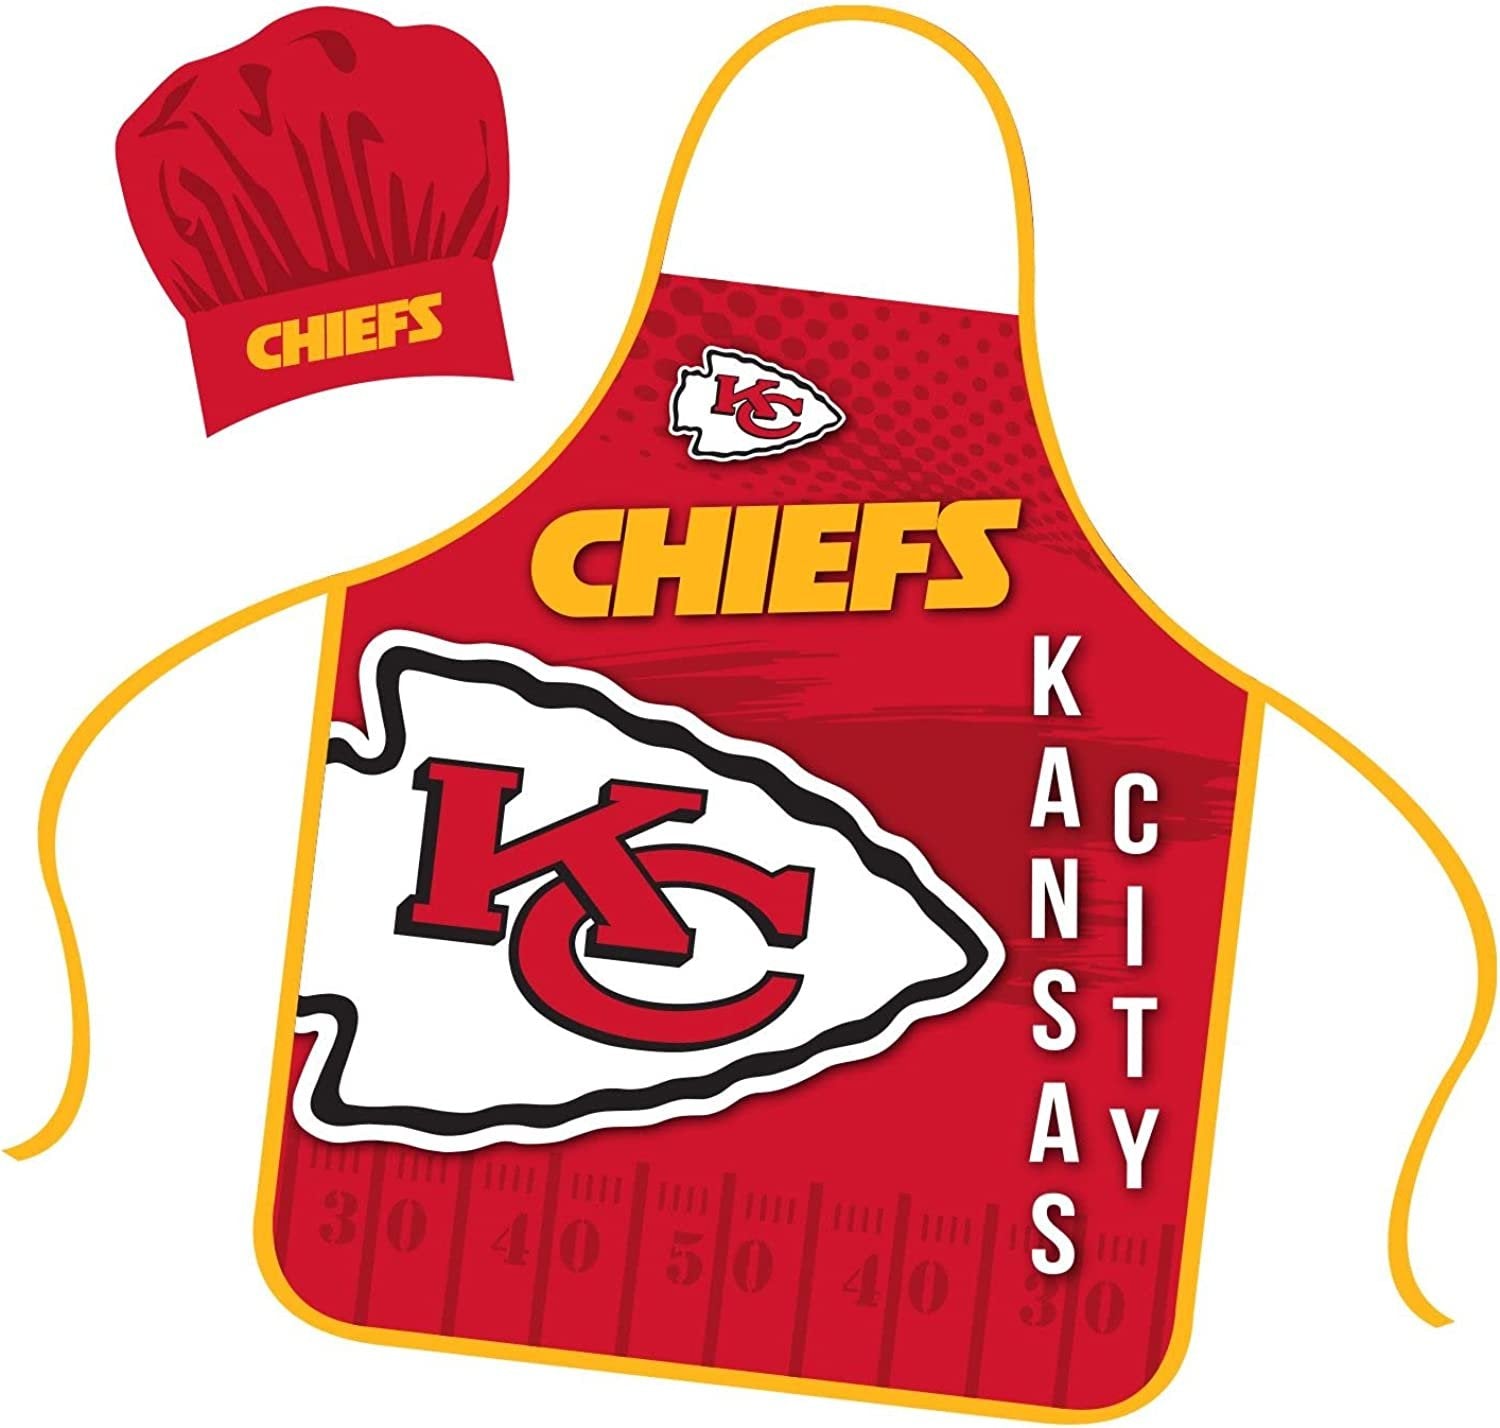 Kansas City Chiefs Apron Chef Hat Set Full Color Universal Size Tie Back Grilling Tailgate BBQ Cooking Host